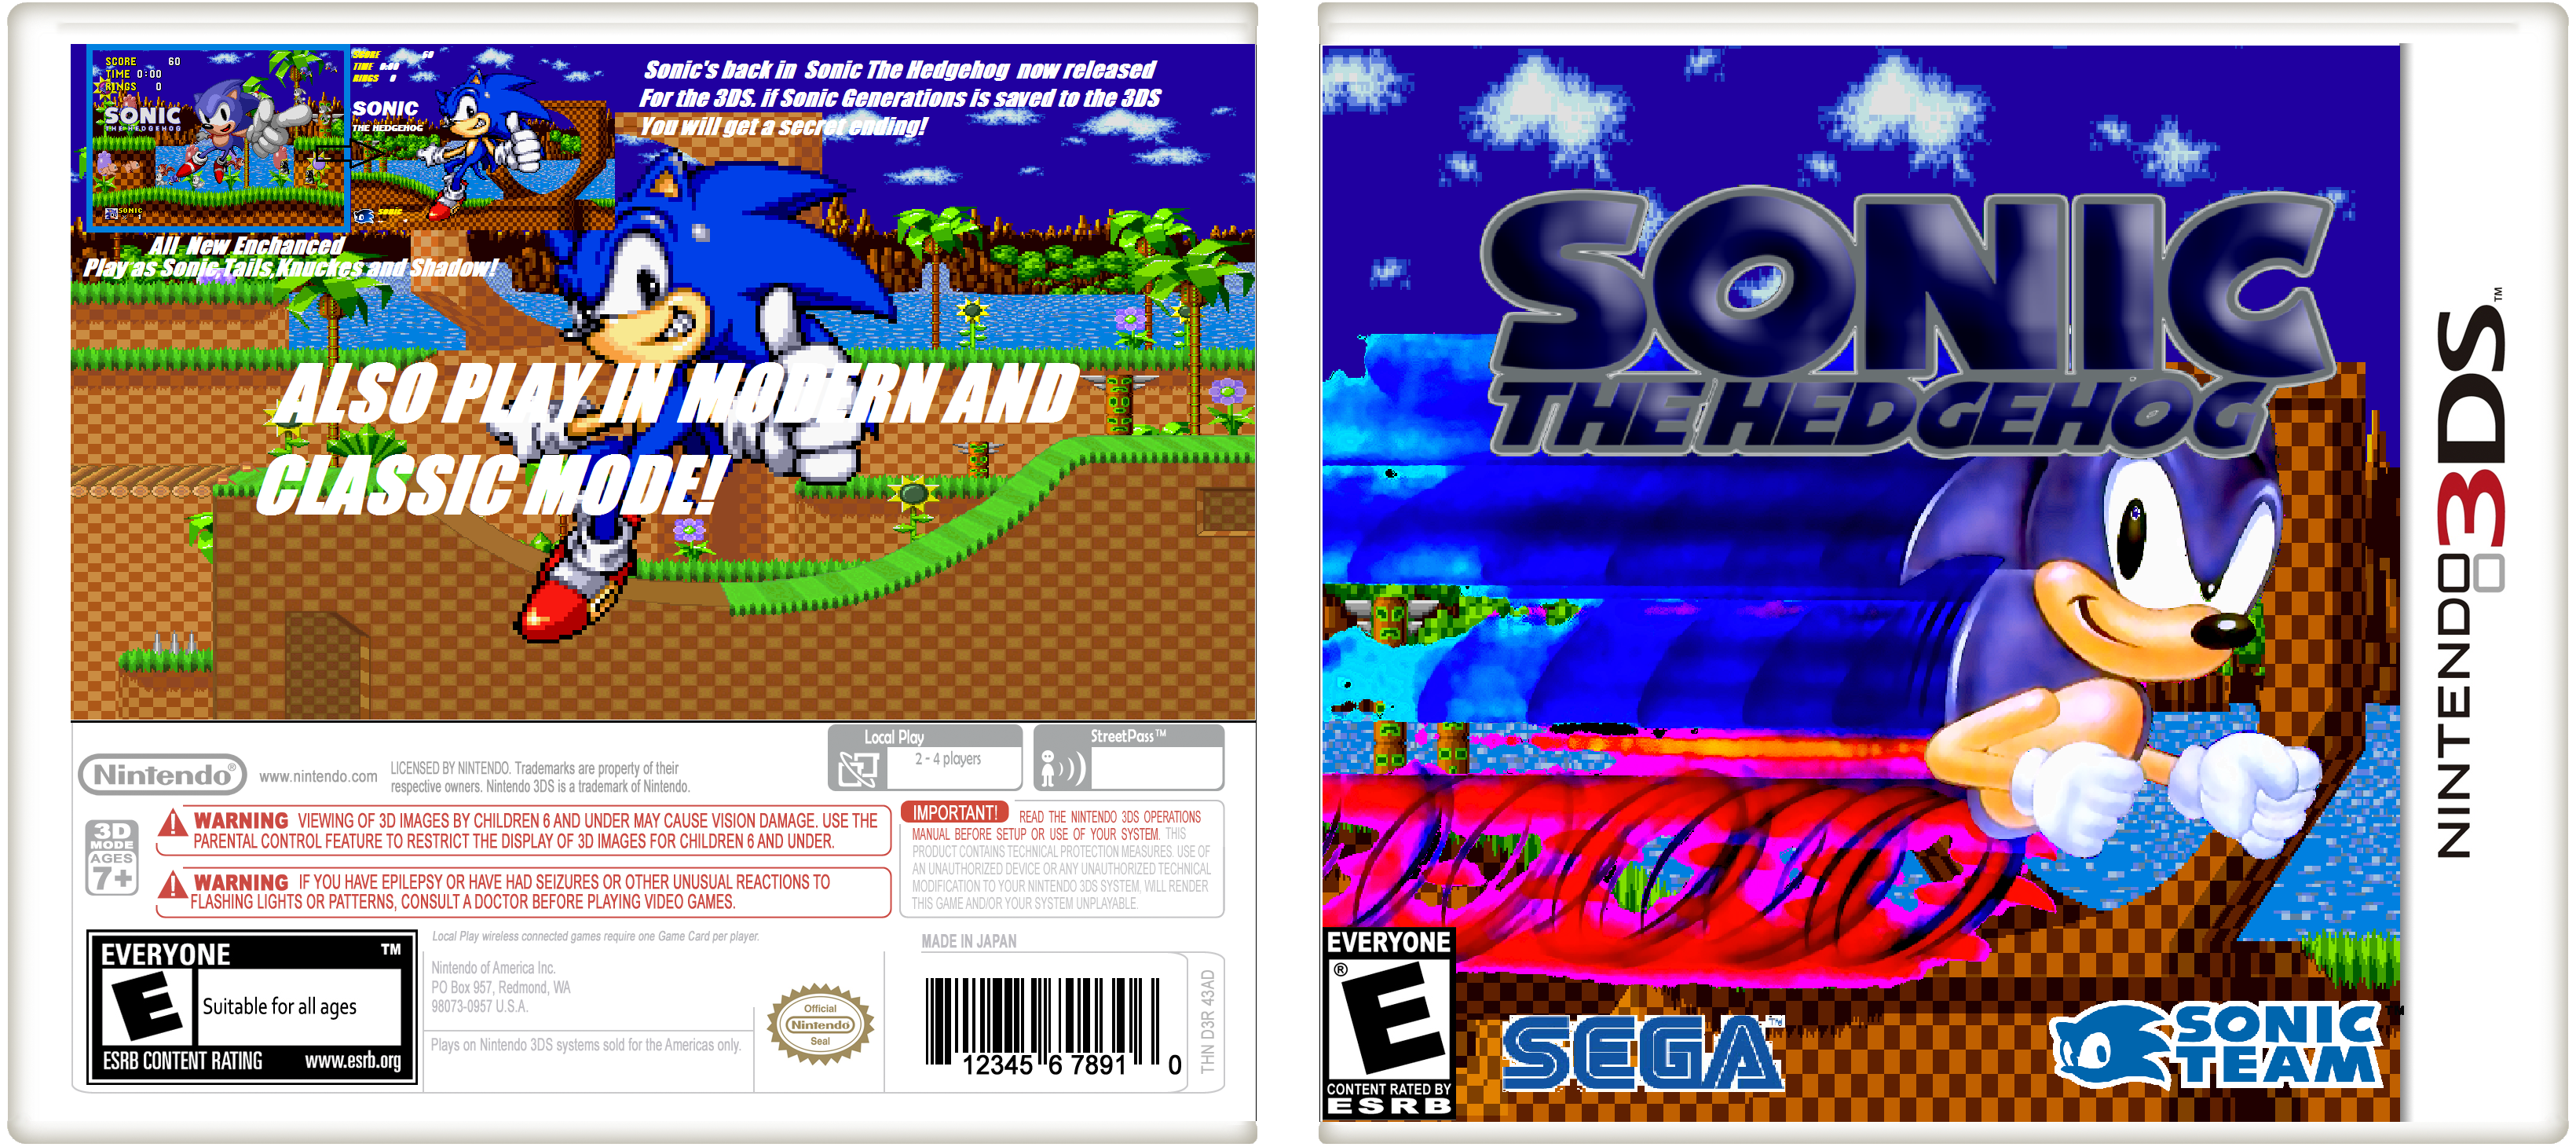 Sonic the hedgehog box cover